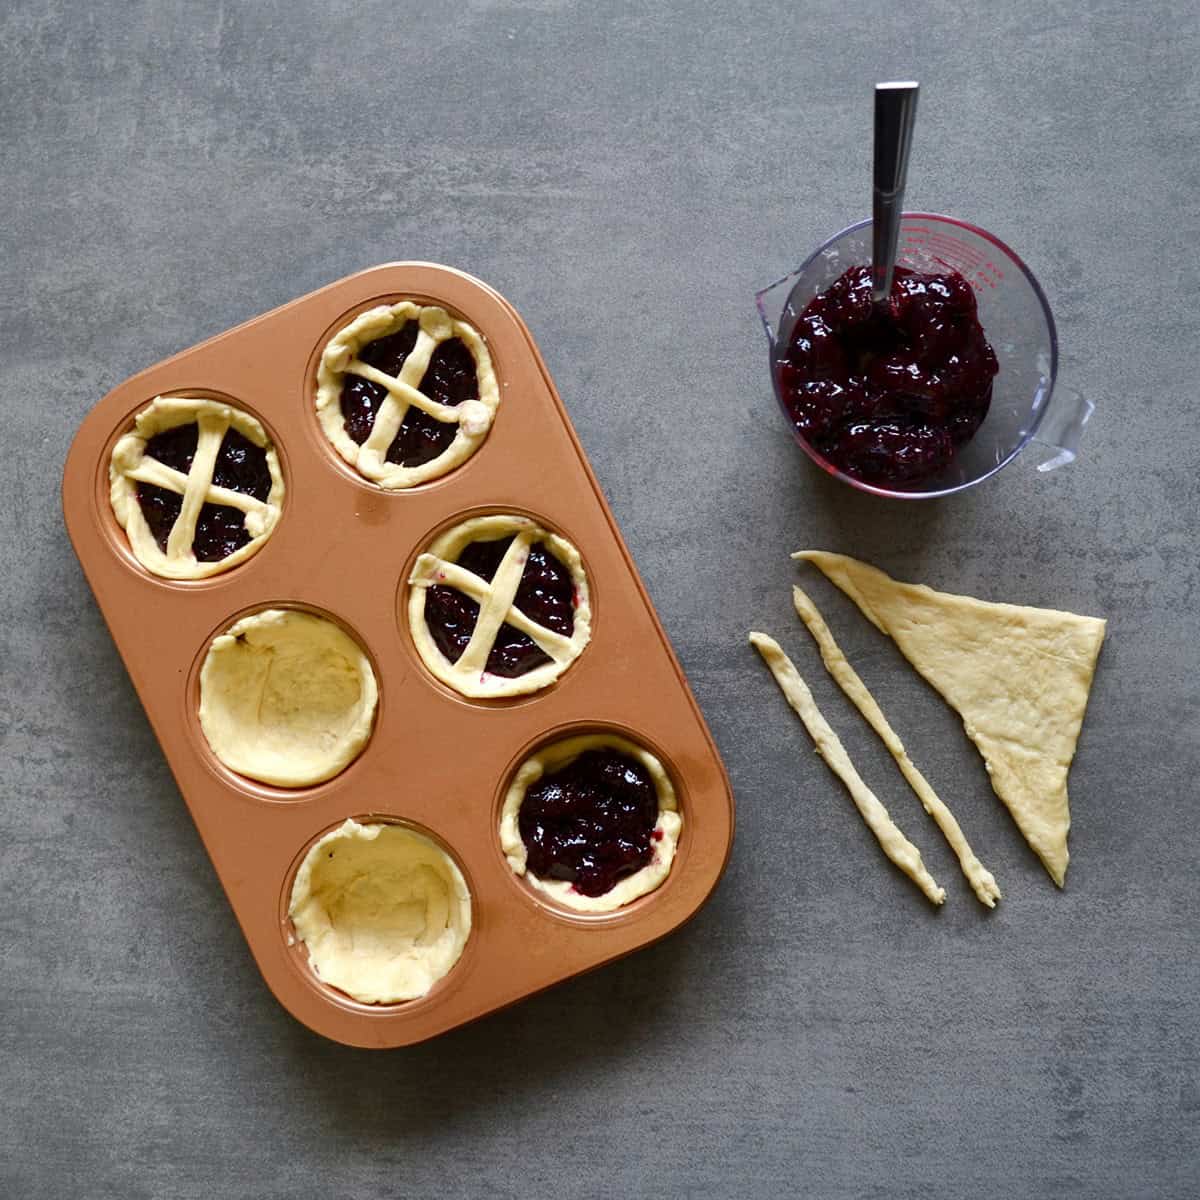 Assembling cherry pies in a muffin tin